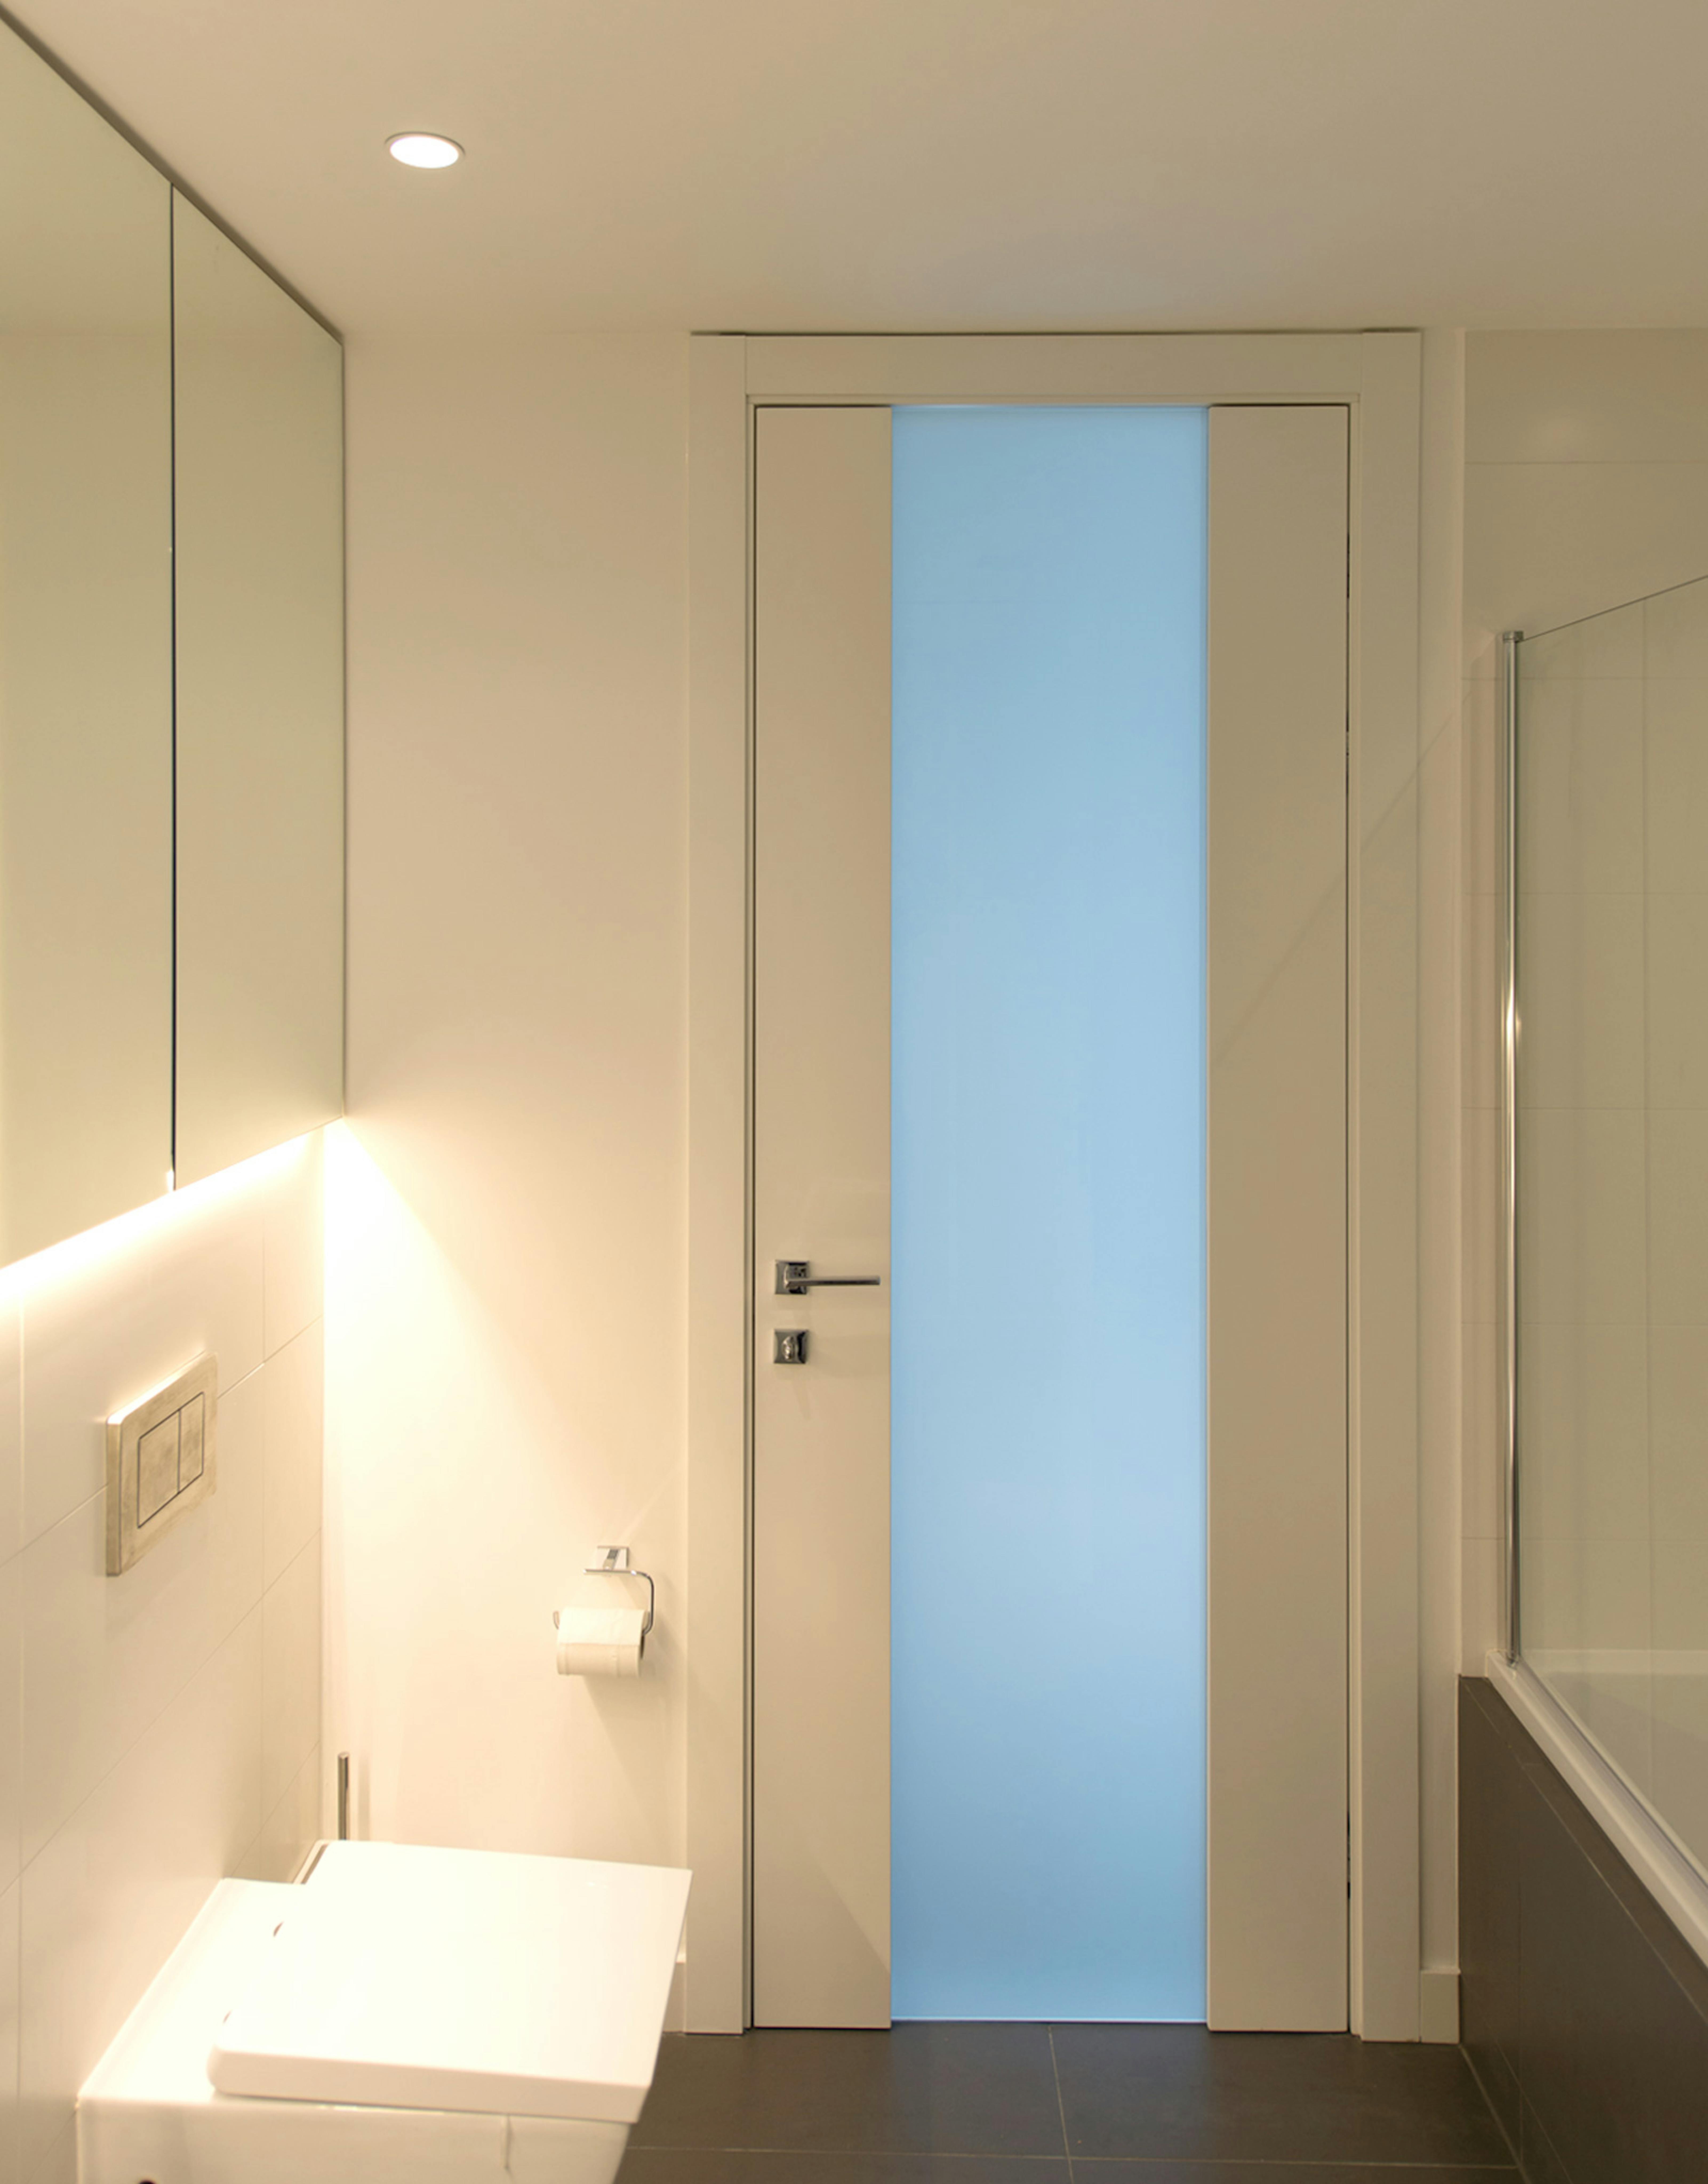 Contemporary bathroom with a Deuren Trem glazed door - a full-height pane of satin glass held between two full-height strips of white painted timber.